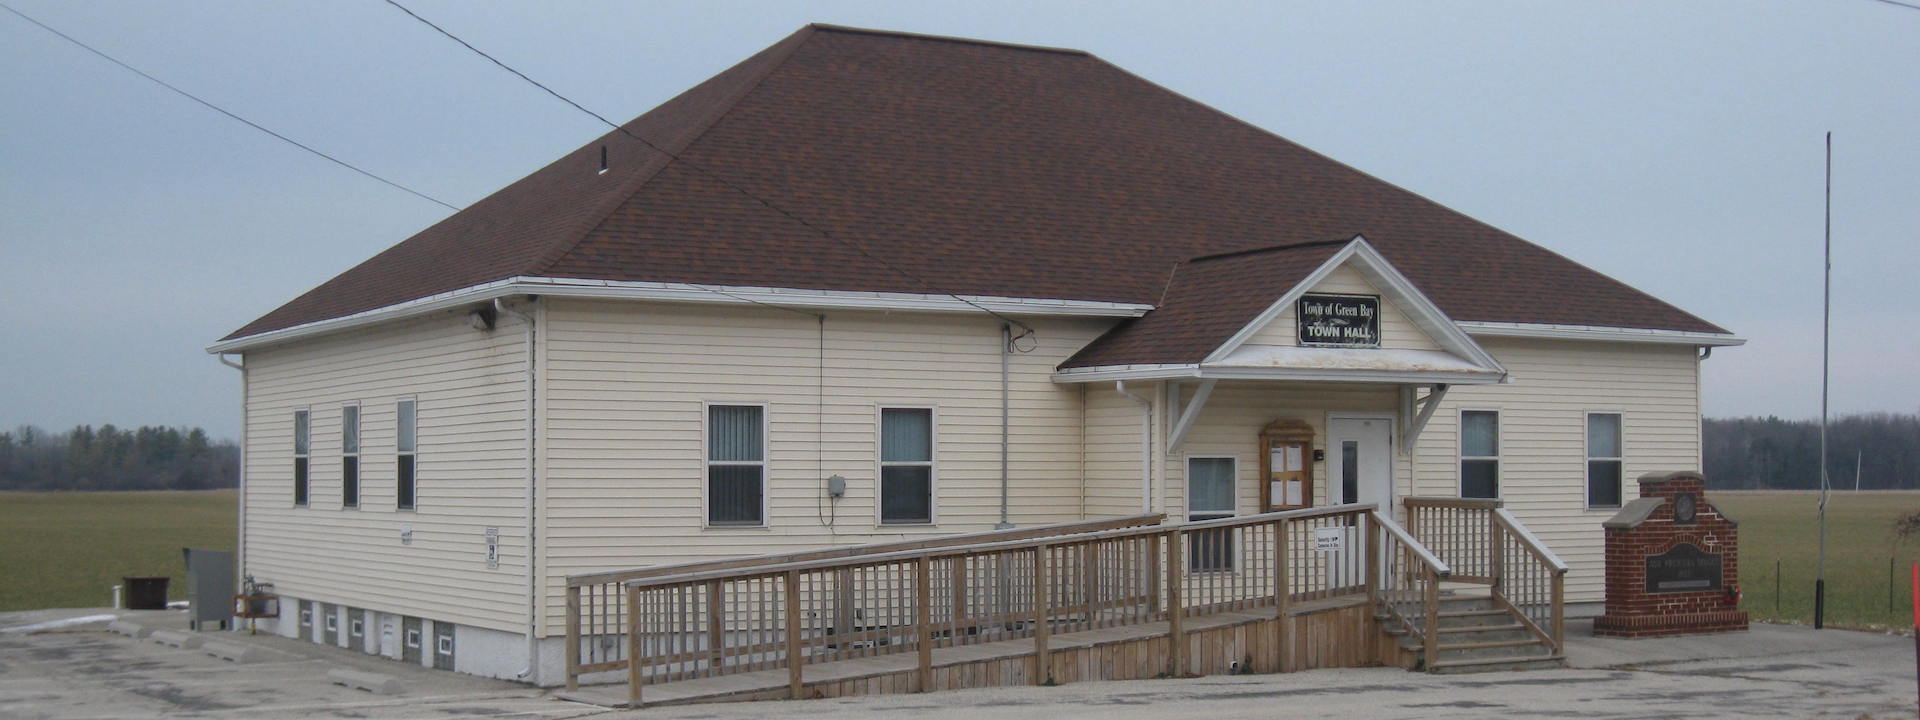 Town of Green Bay Town Hall building